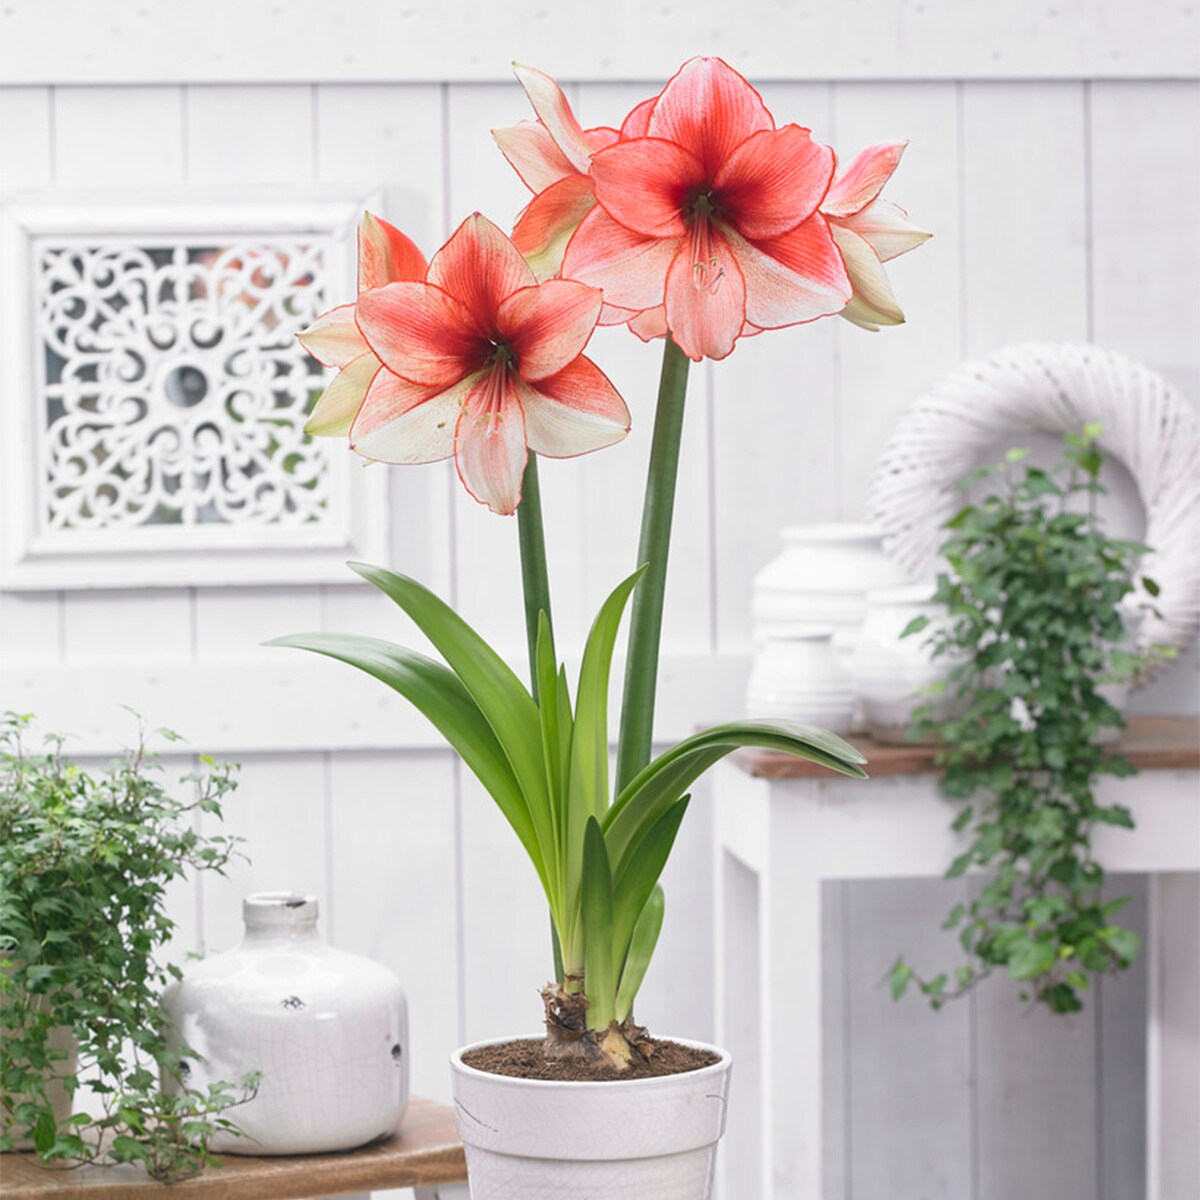 Van Zyverden Multicolor Amaryllis Coral Beach Bulbs 1-Pack in the Plant ...